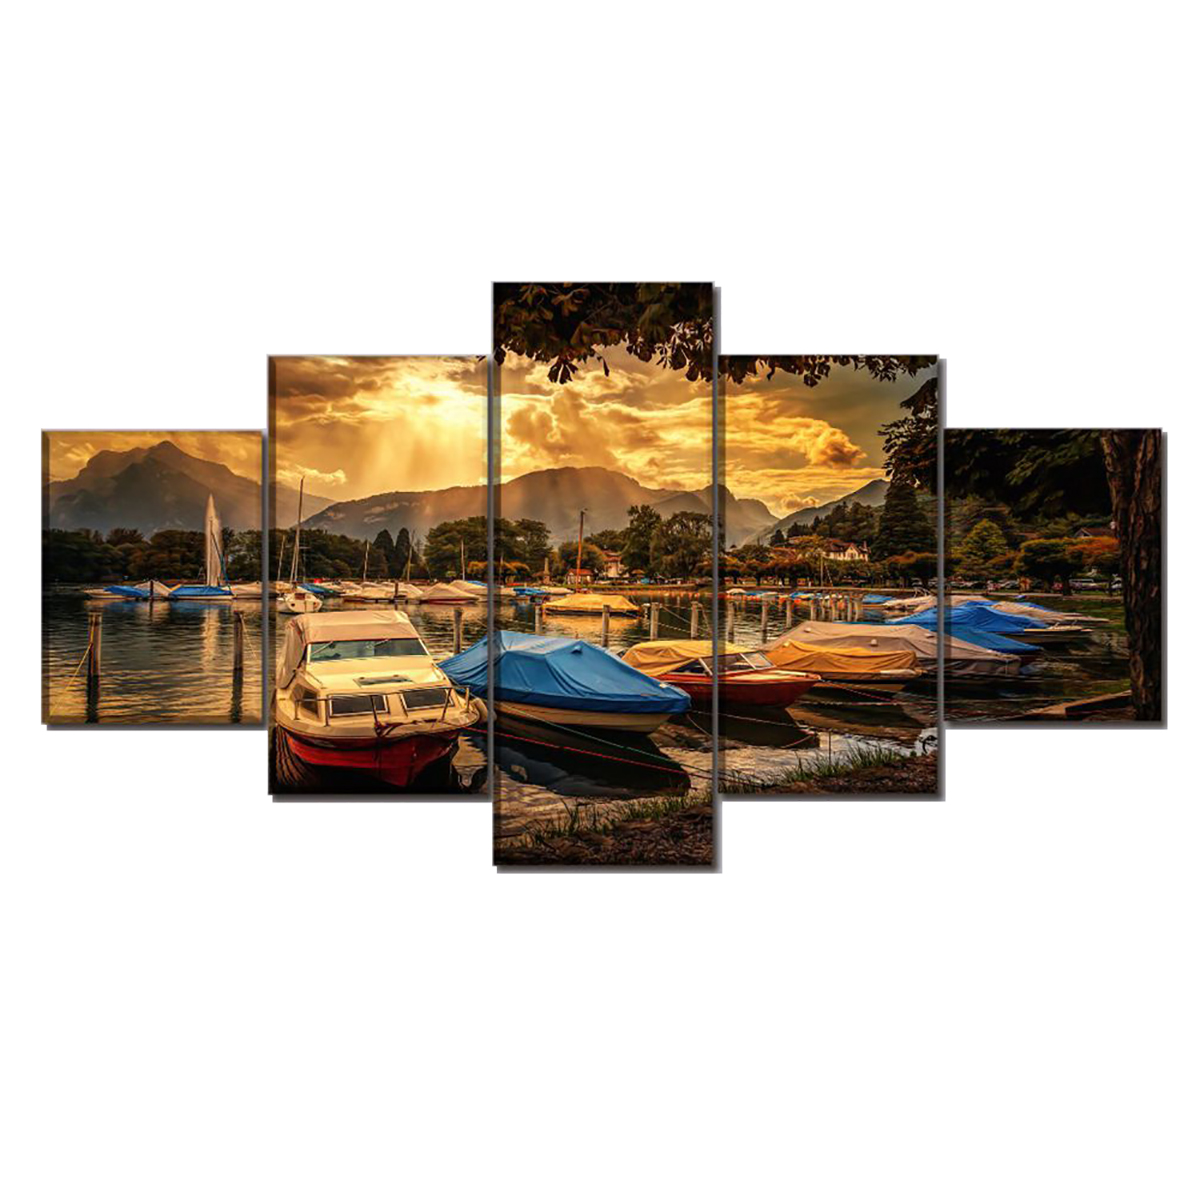 5Pcs-Canvas-Print-Paintings-Scenery-Oil-Painting-Wall-Decorative-Printing-Art-Picture-Frameless-Home-1758668-19